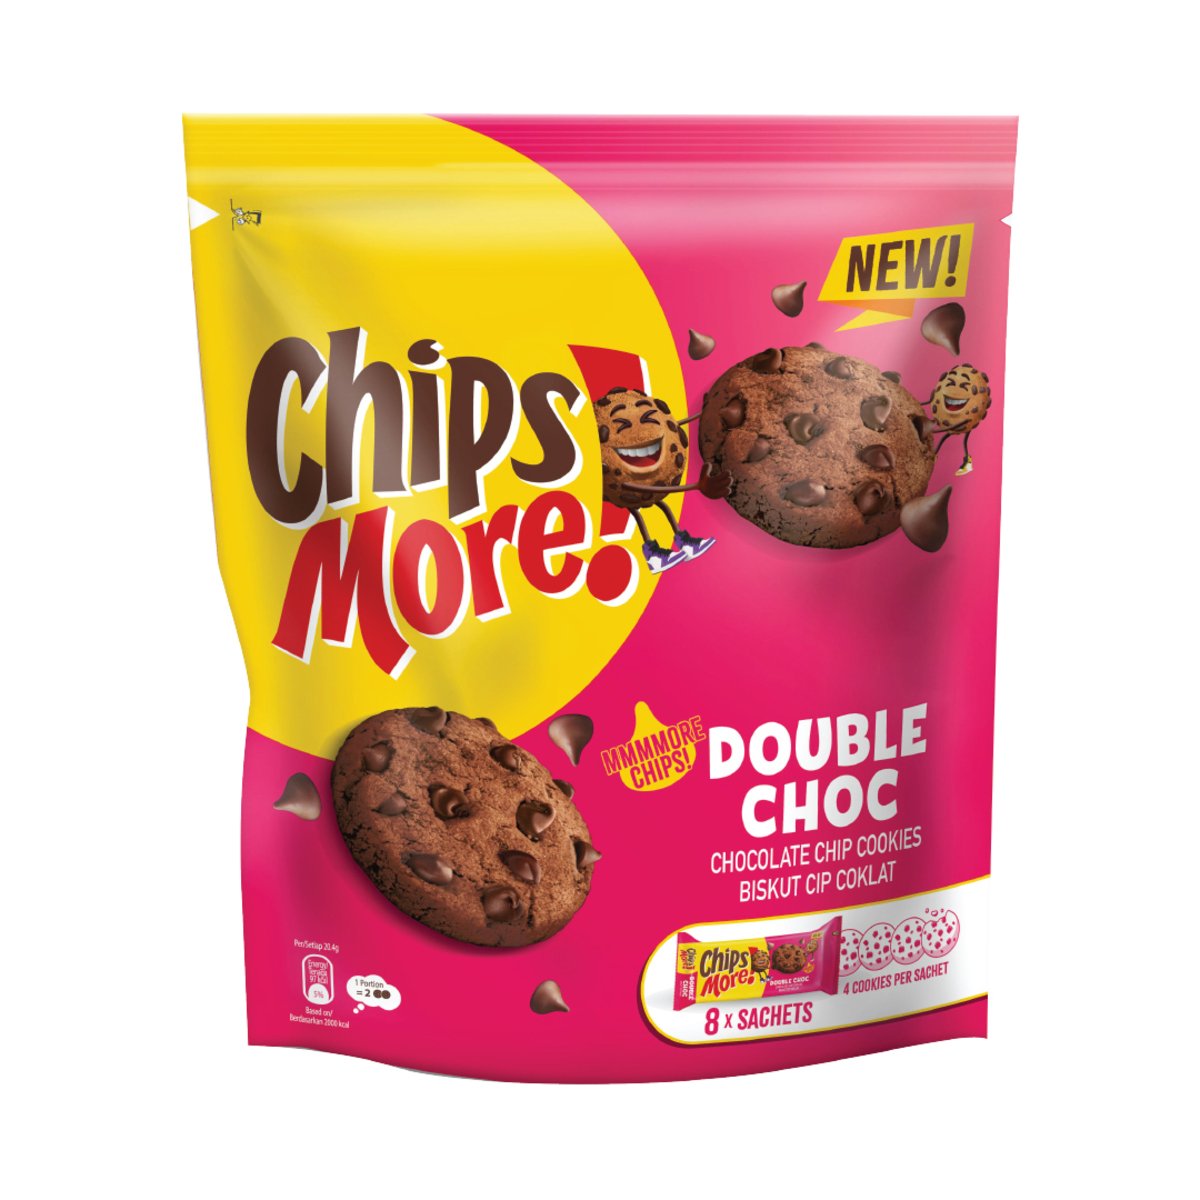 Chipsmore Double Chocolate Chip Cookies 40.8g X 8sachets